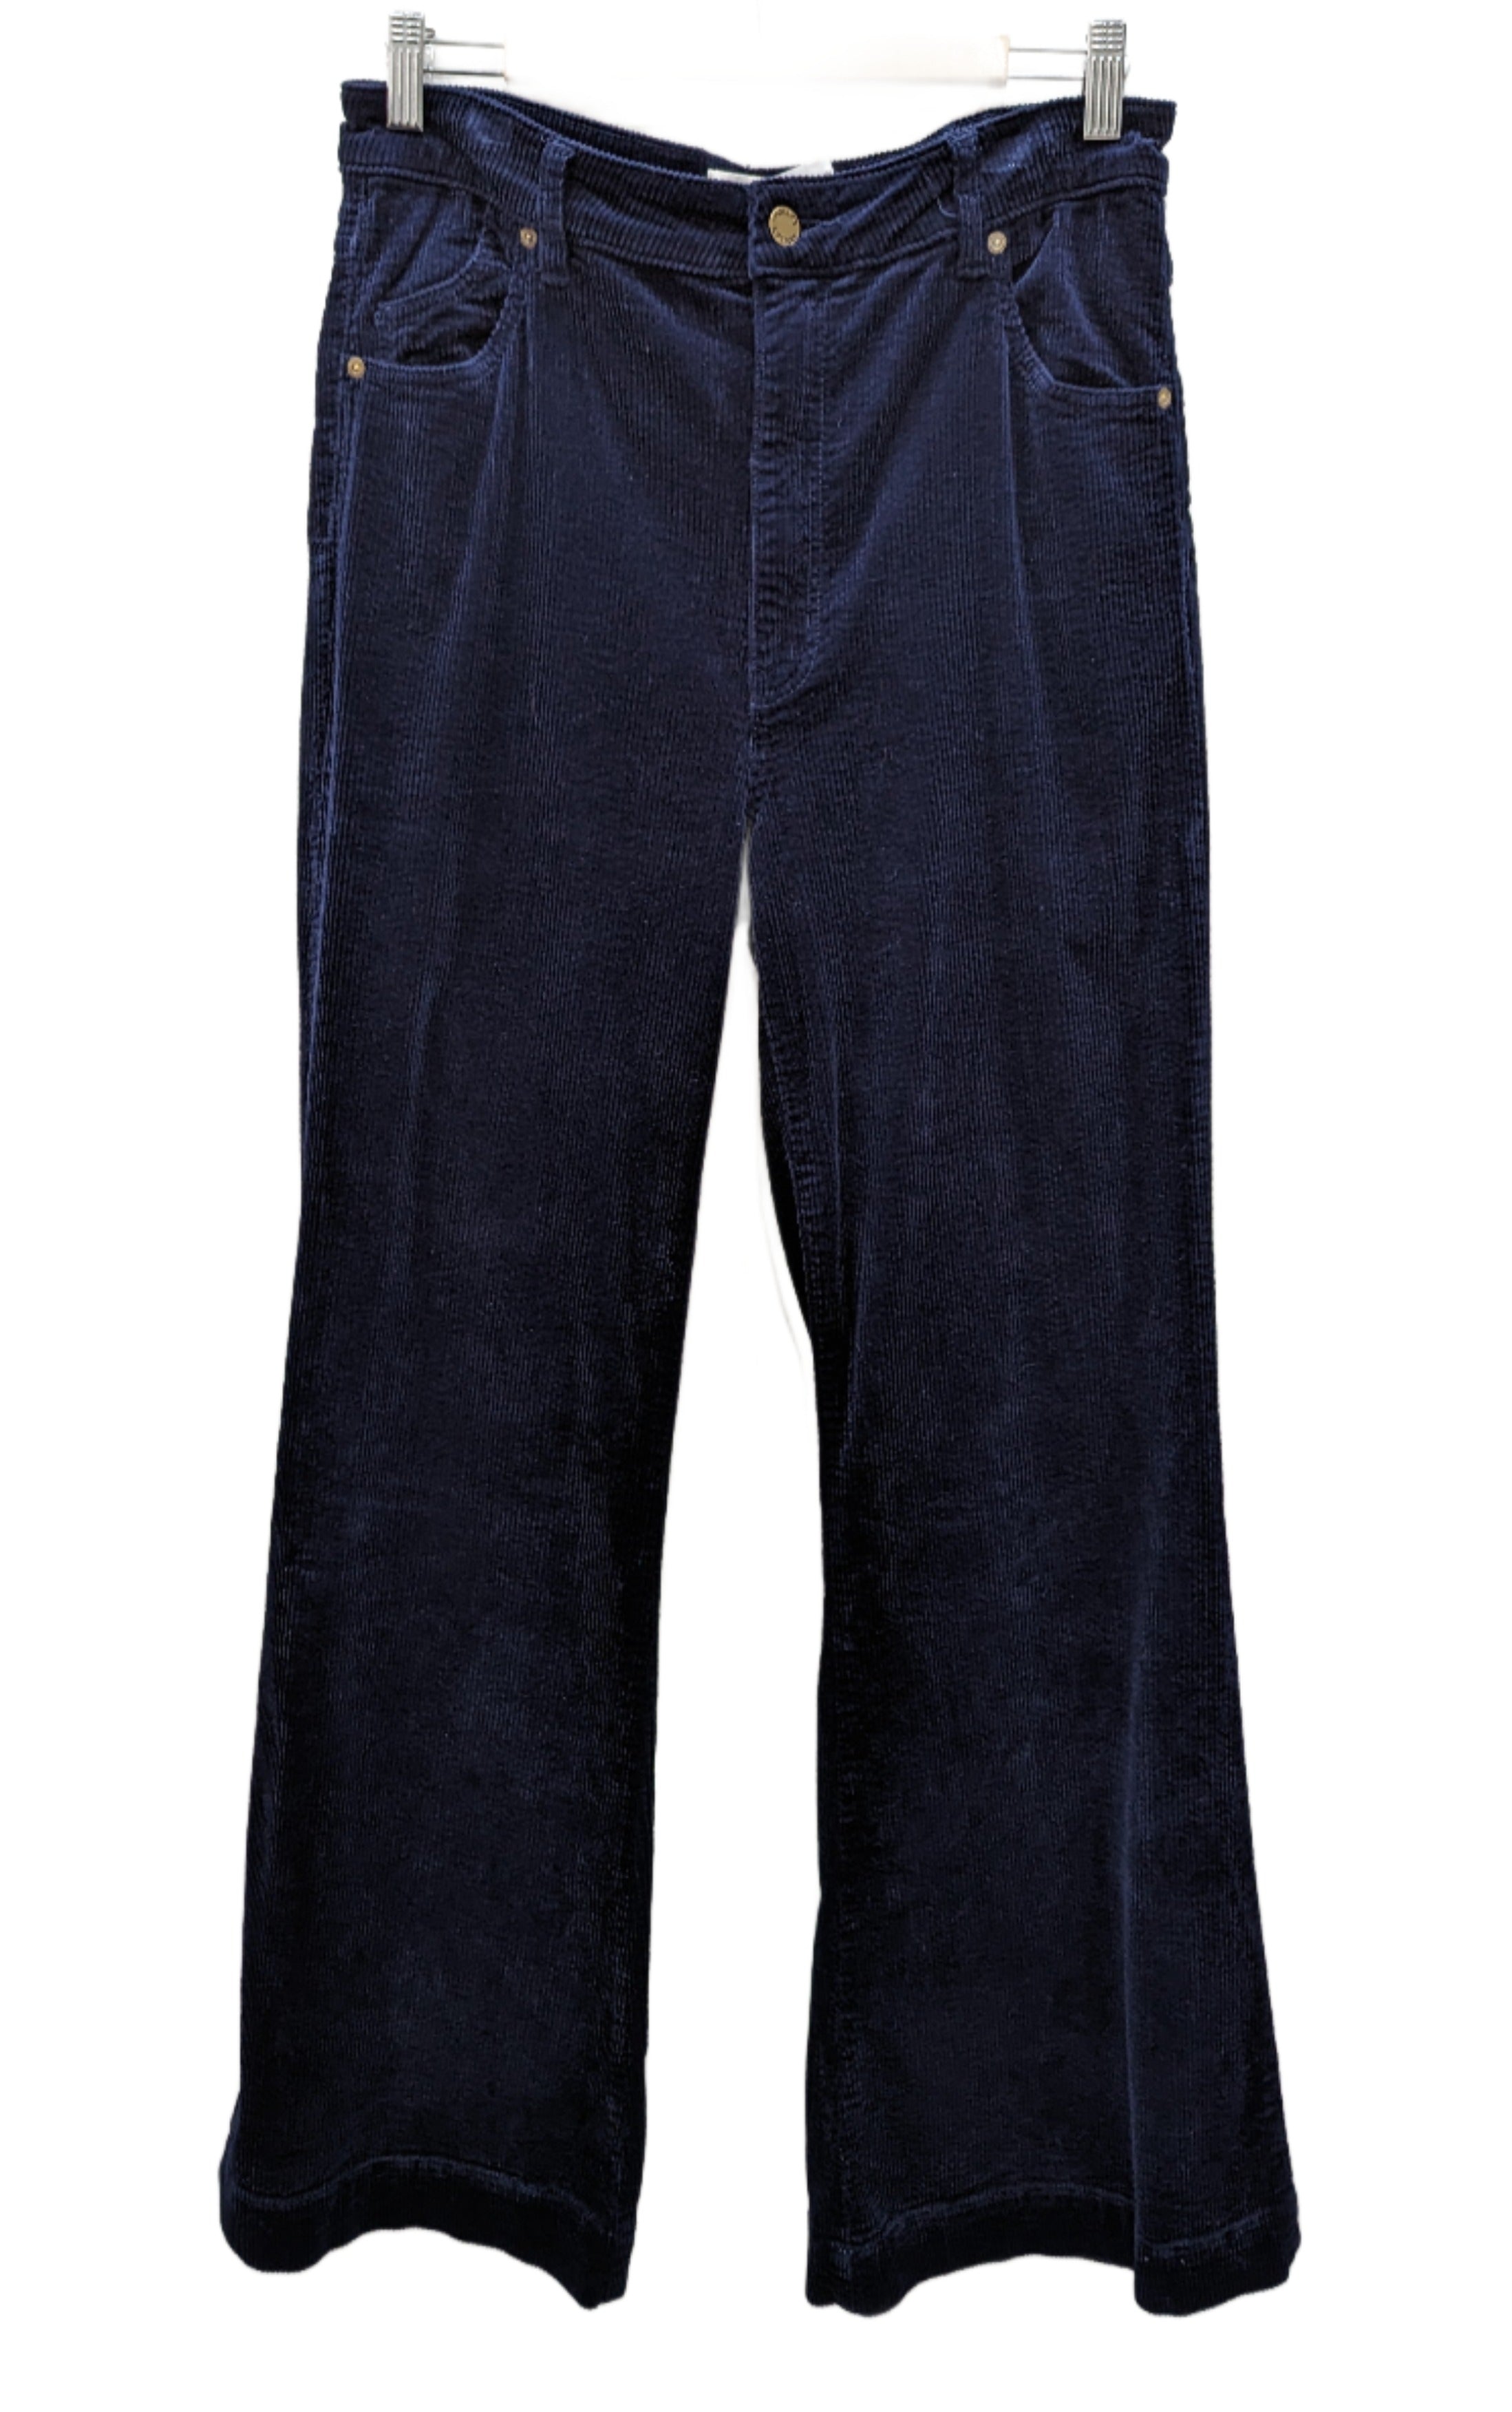 Rolla's Blue Corduroy Flared Pants